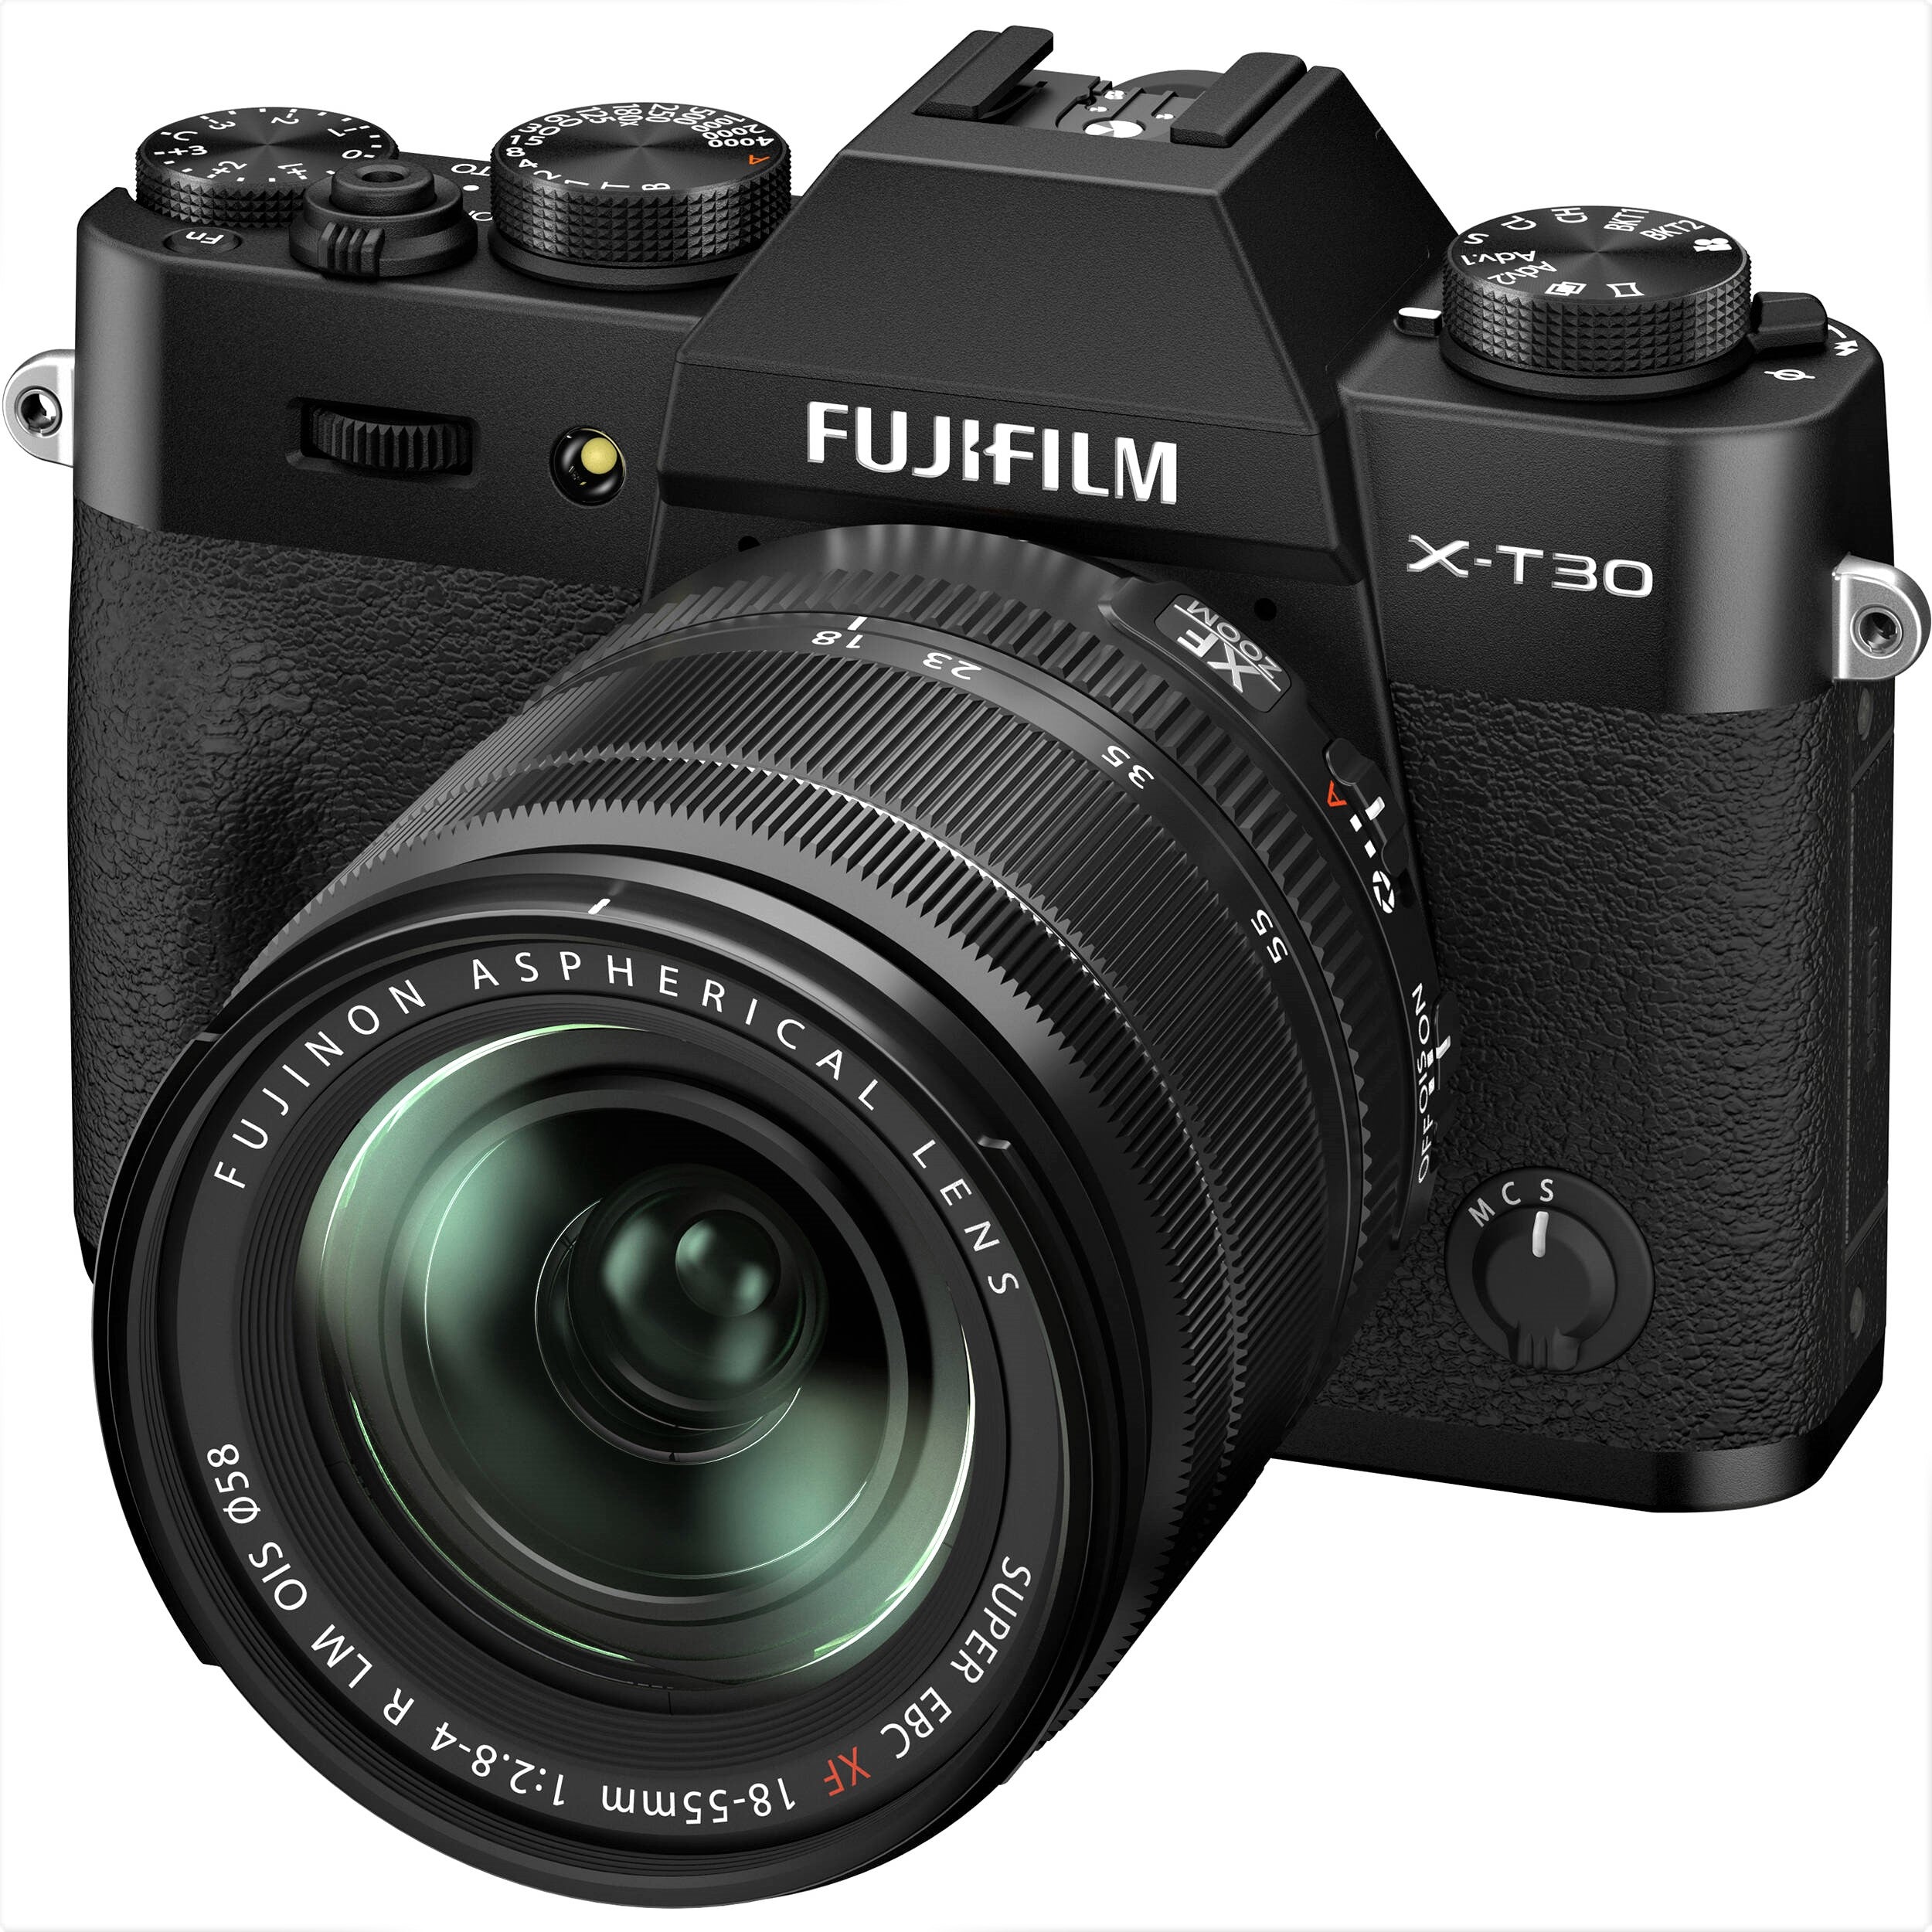 Fujifilm X-T30 II Mirrorless Camera with 18-55mm Lens (Black) - Distant view